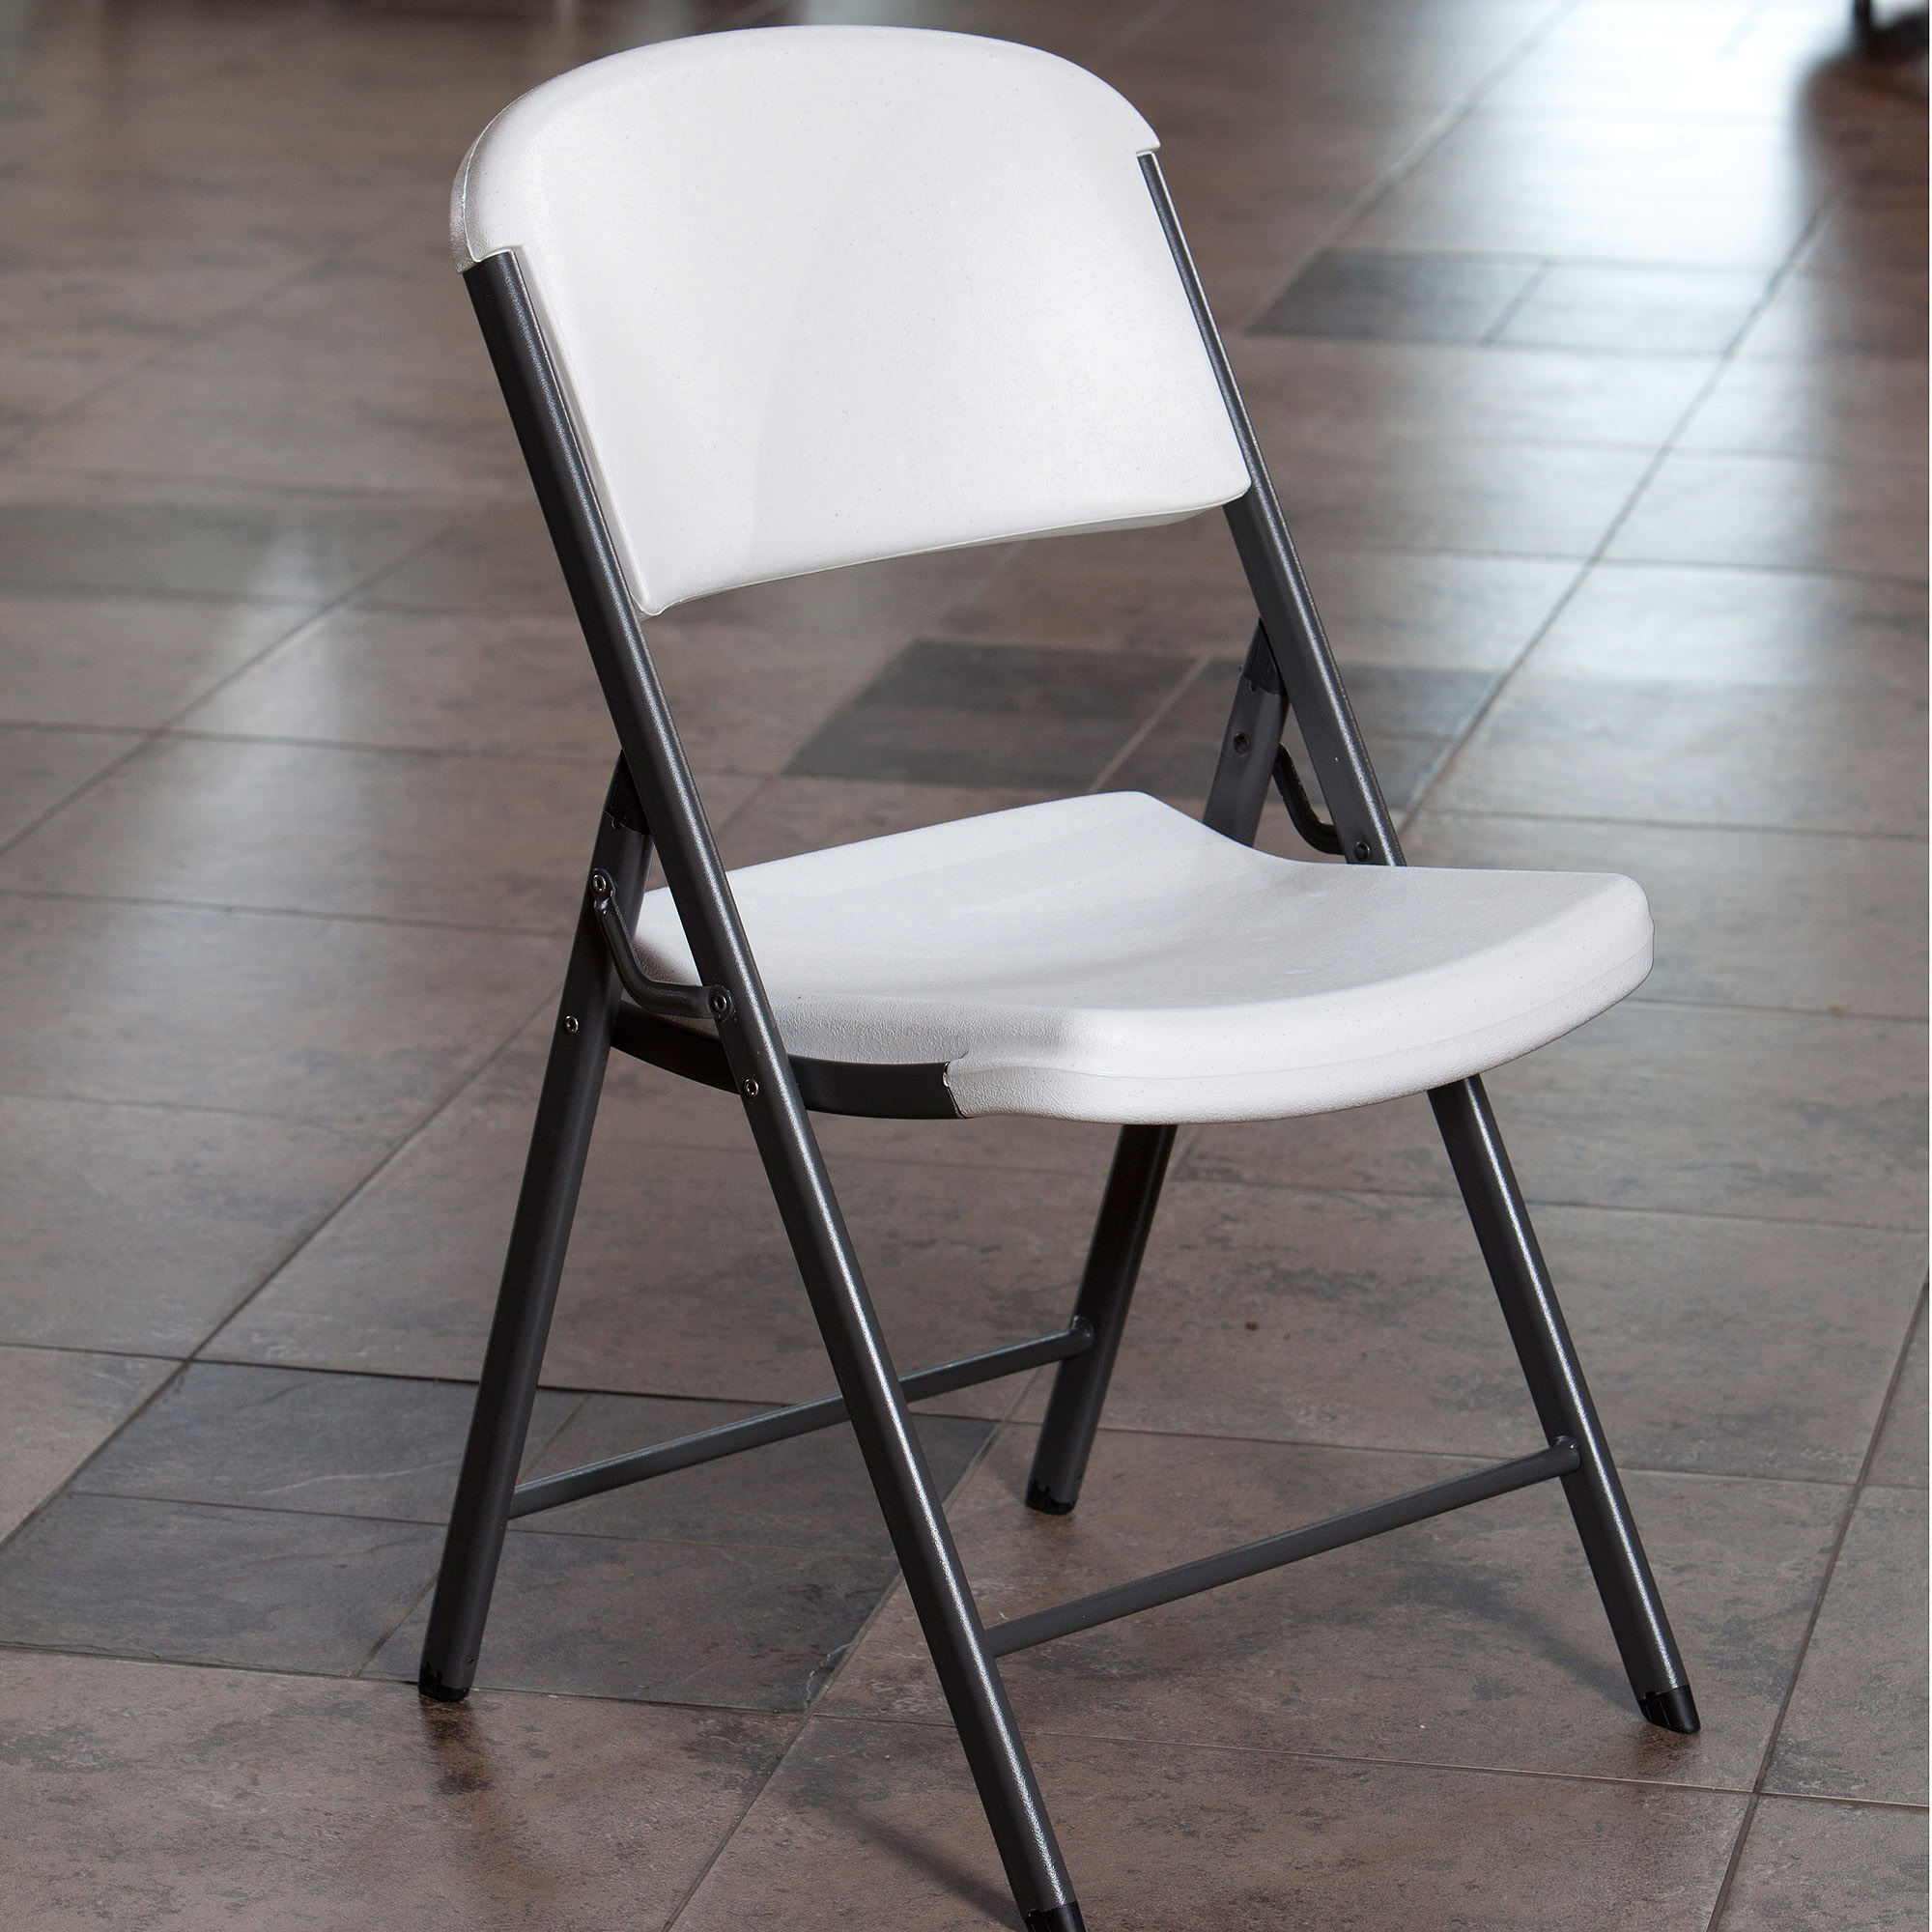 Super folding chairs just for you.